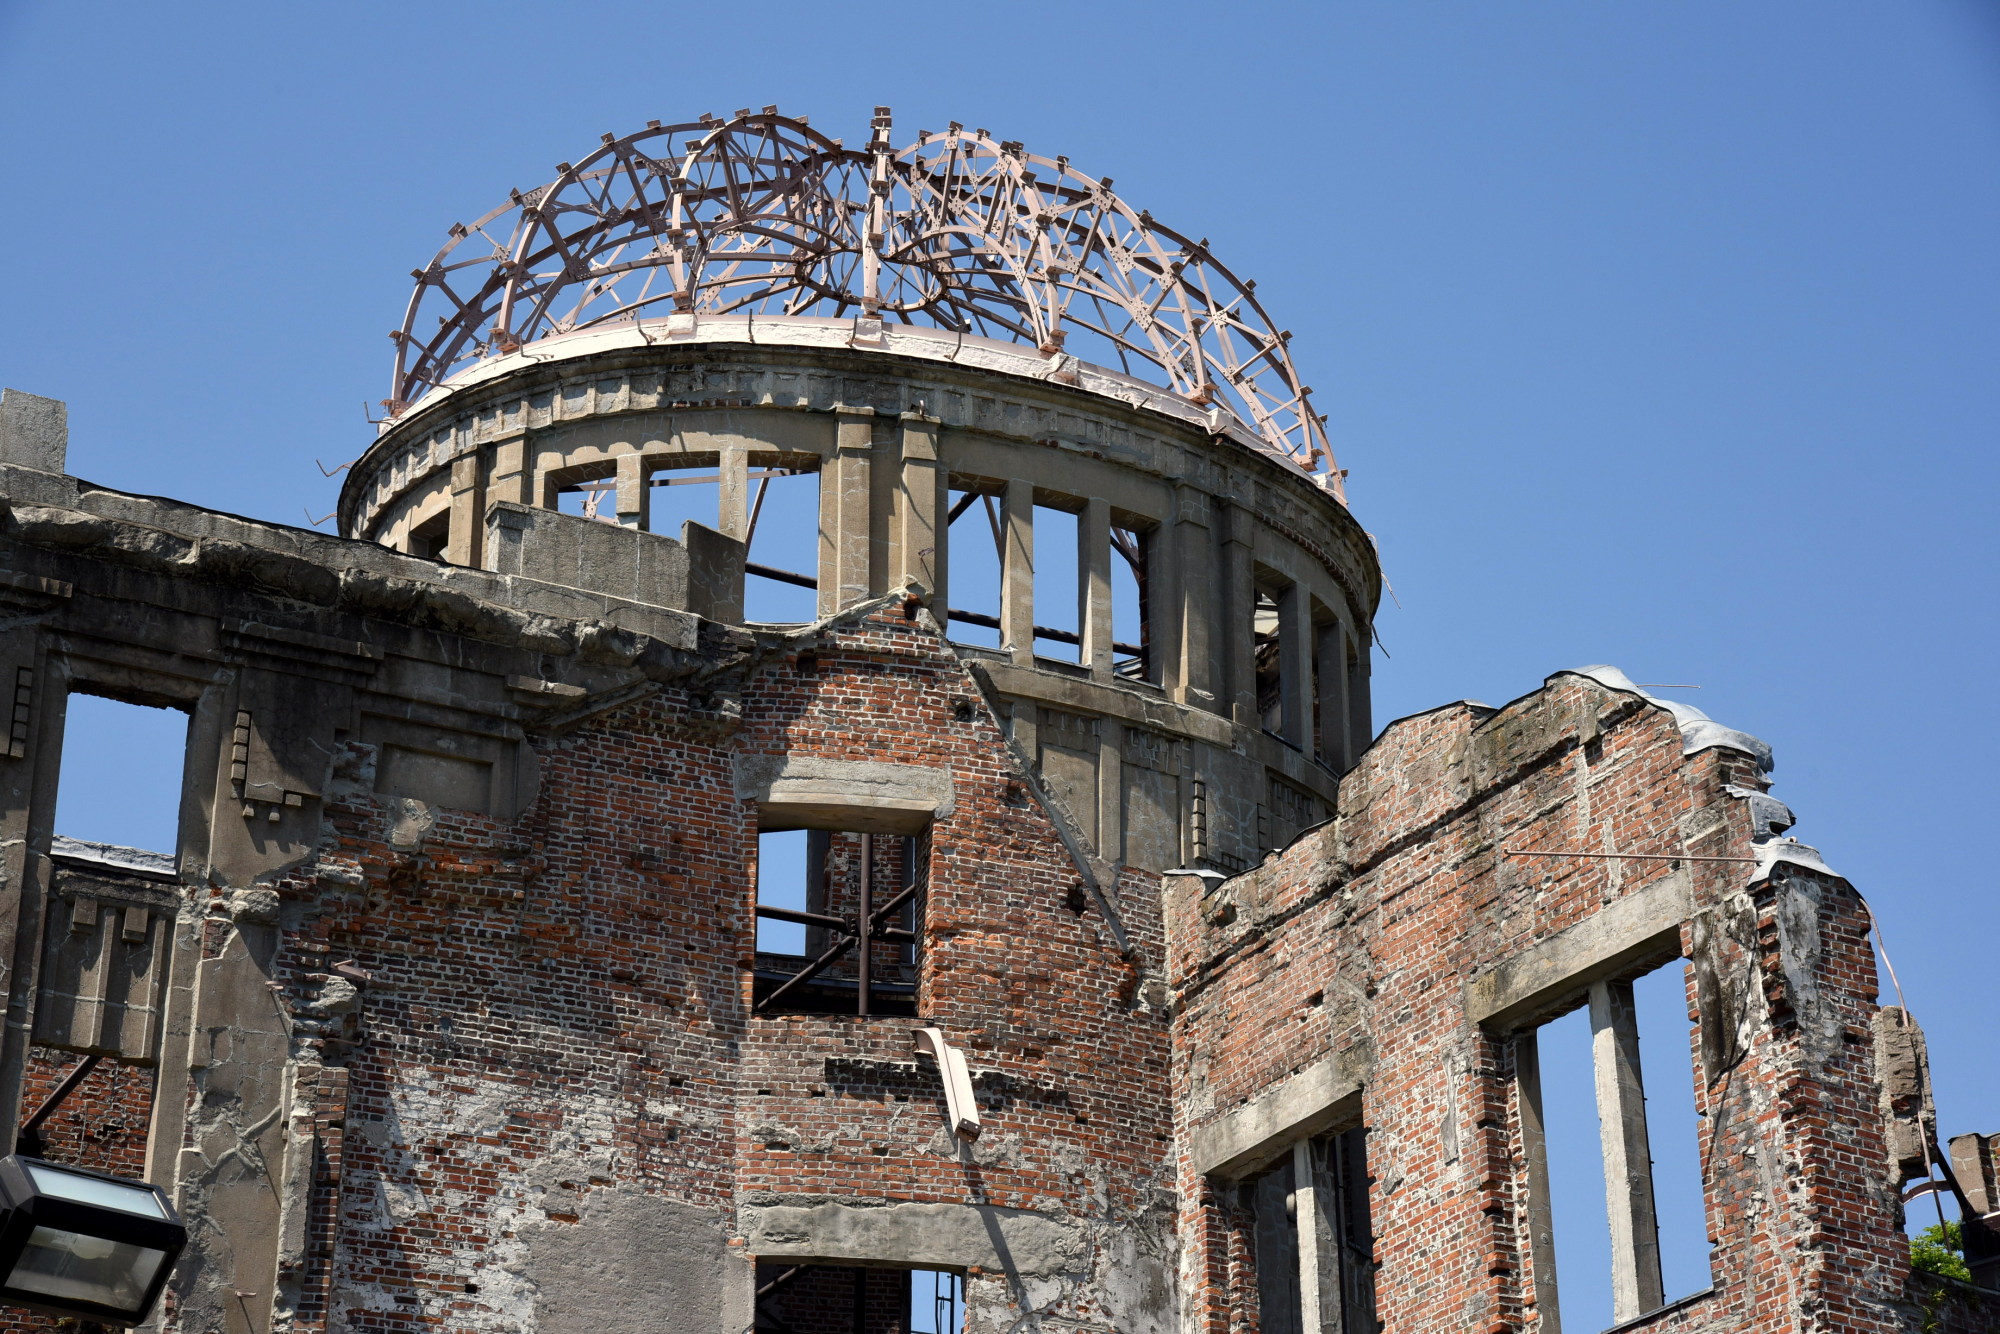 The Atomic Bomb Dome is seen in Hiroshima in May 2016. A clear policy difference has emerged between Japan and the United States over the importance of Article 6 of the Nuclear Non-Proliferation Treaty, which calls on nuclear-armed states to pursue nuclear disarmament. | SATOKO KAWASAKI